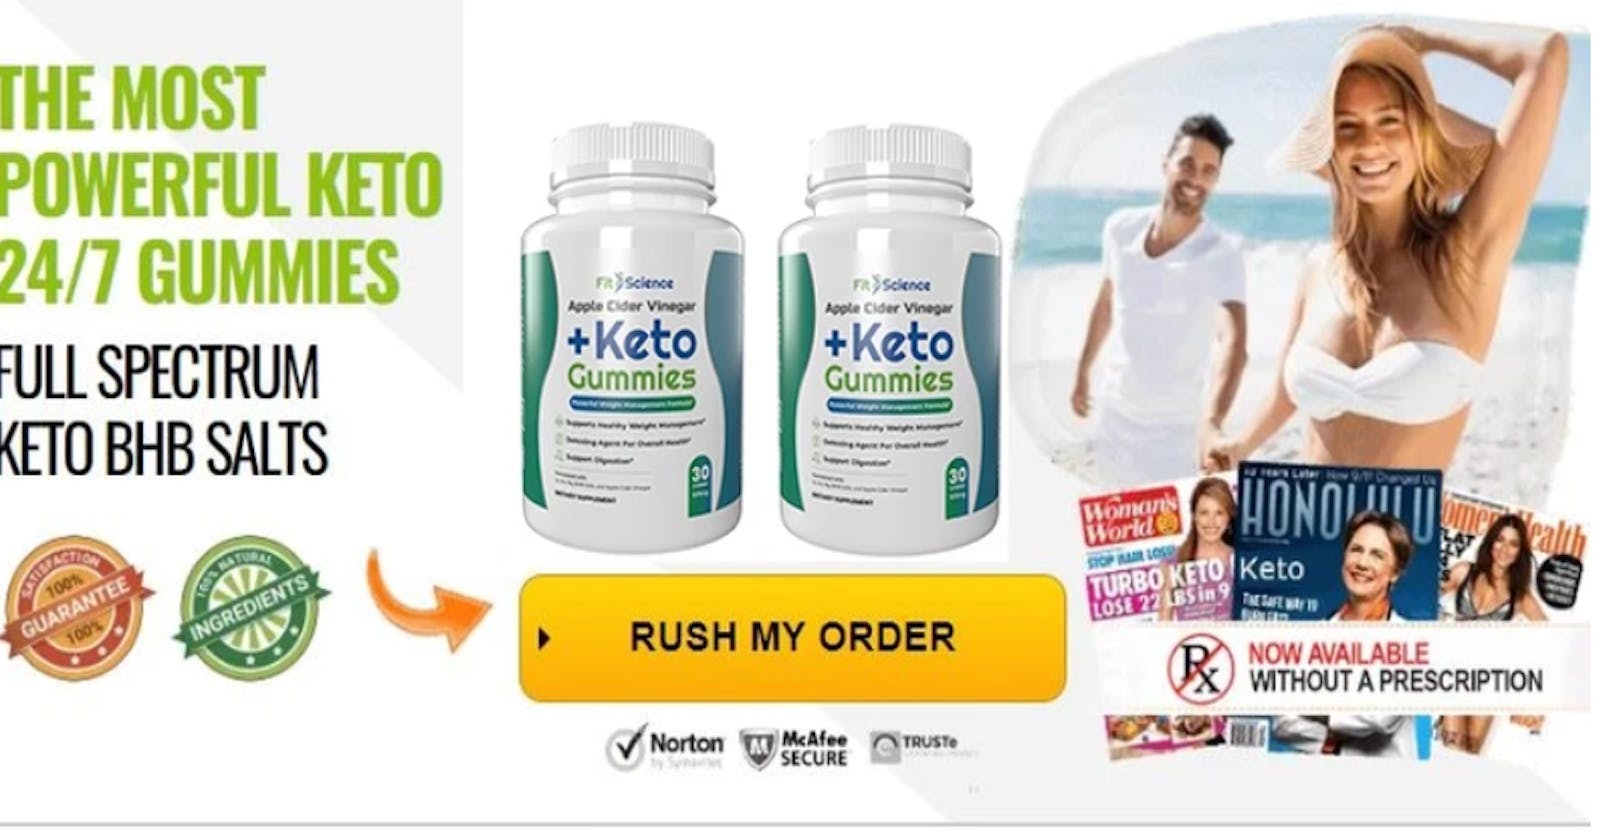 Fit Science Keto Gummies (Scam Alert Review) #1 Weight Loss Gummy Or Waste Of Money?